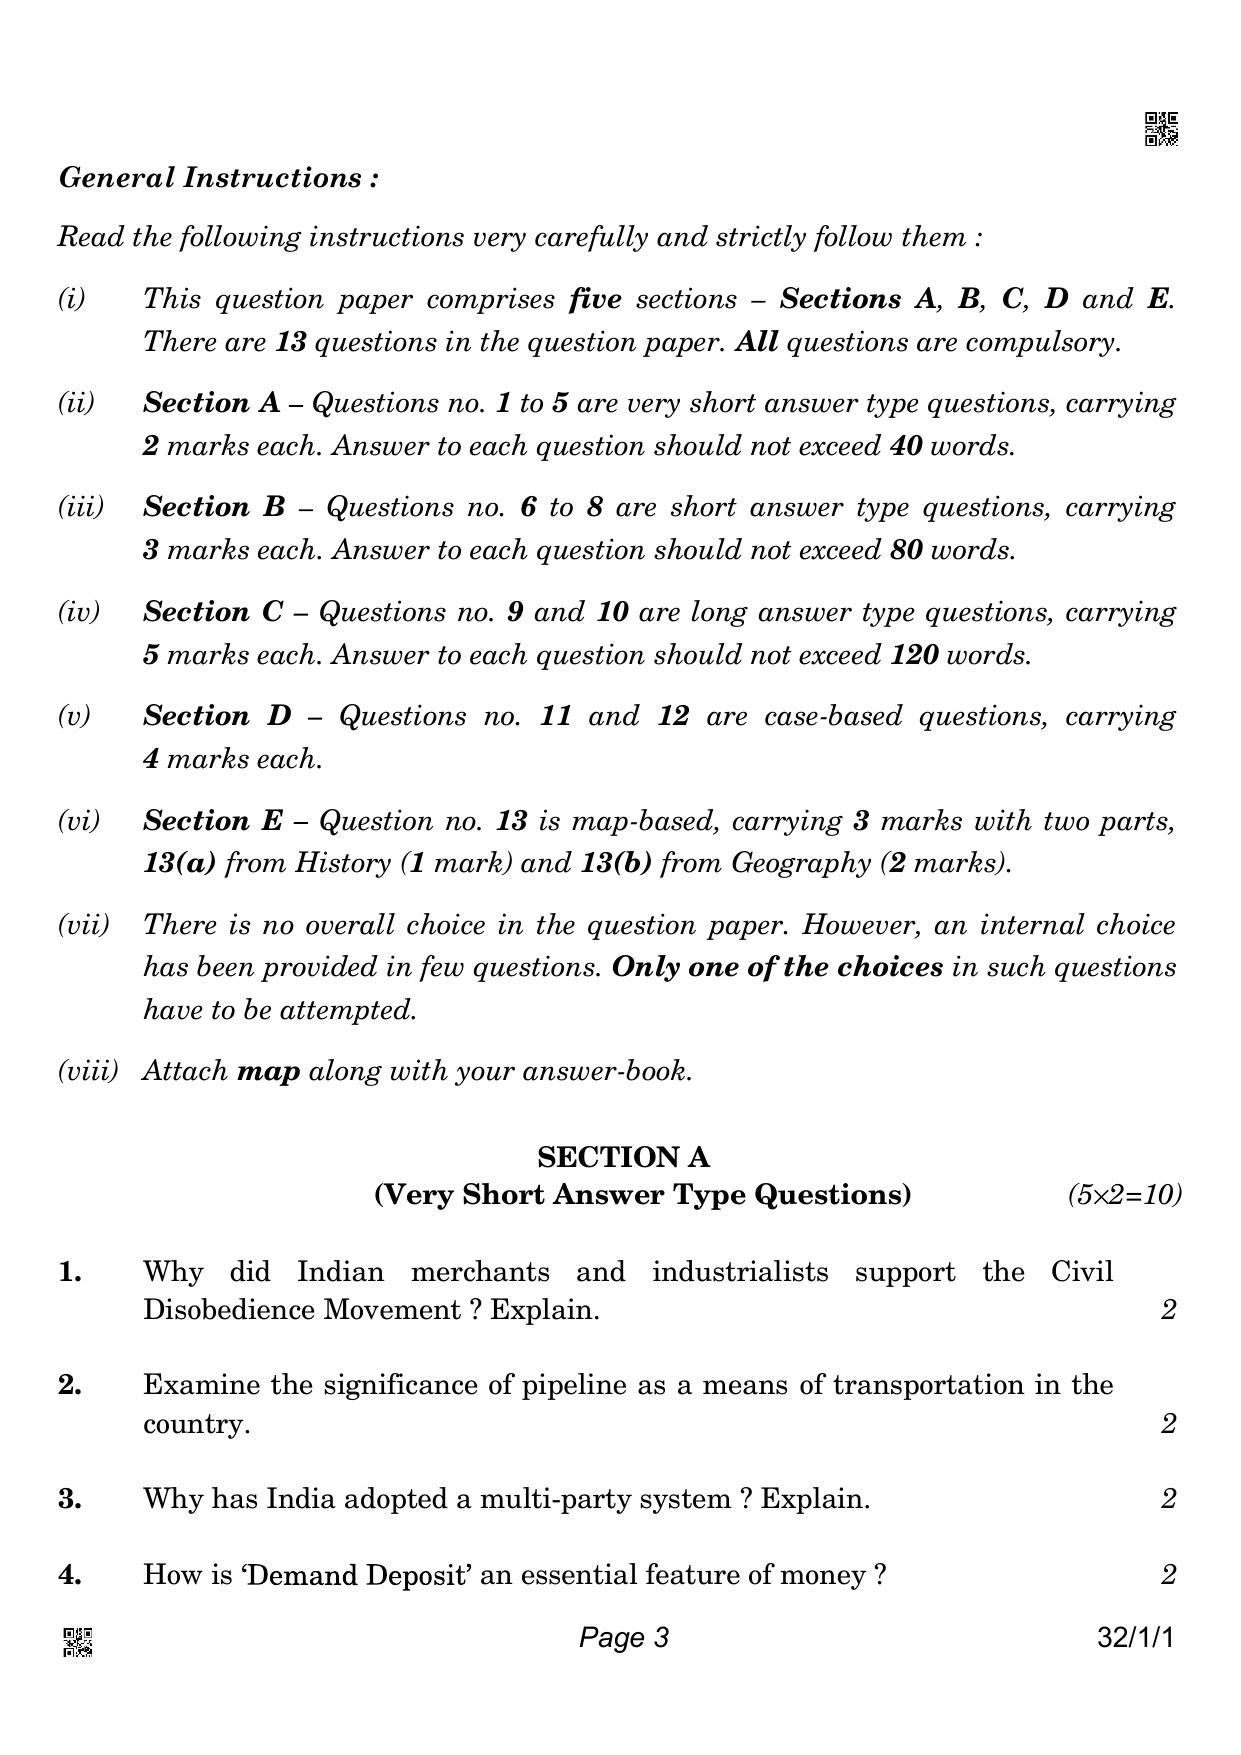 CBSE Class 10 32-1-1 Social Science 2022 Question Paper - Page 3